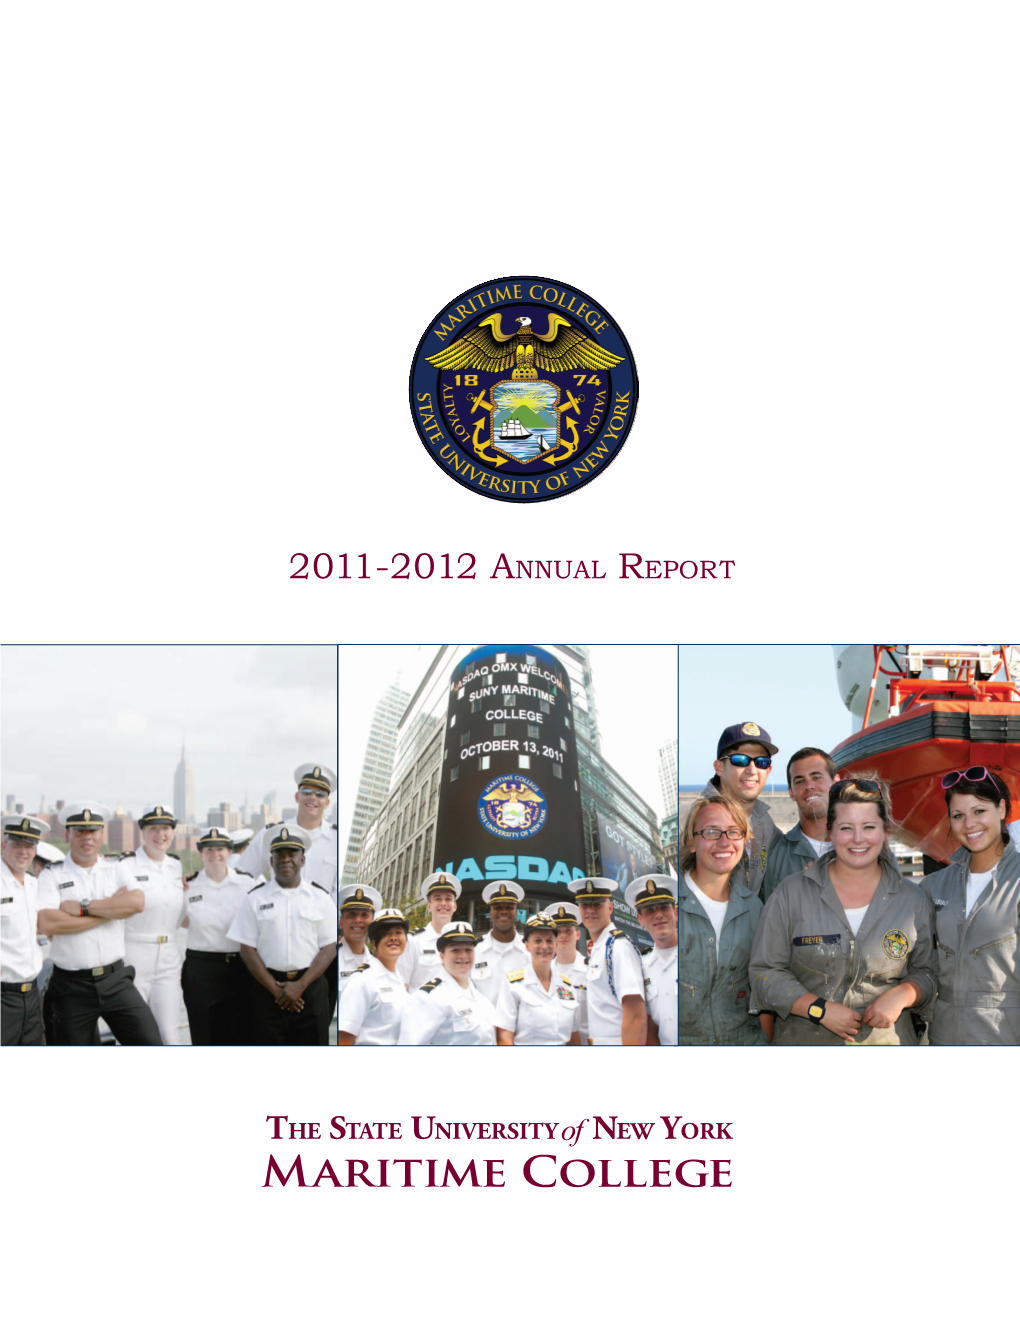 SUNY Maritime College As President on August 31, 2011, and I Am Pleased to Share This Snapshot of the Tremendous Work That Is On-Going at SUNY Maritime College